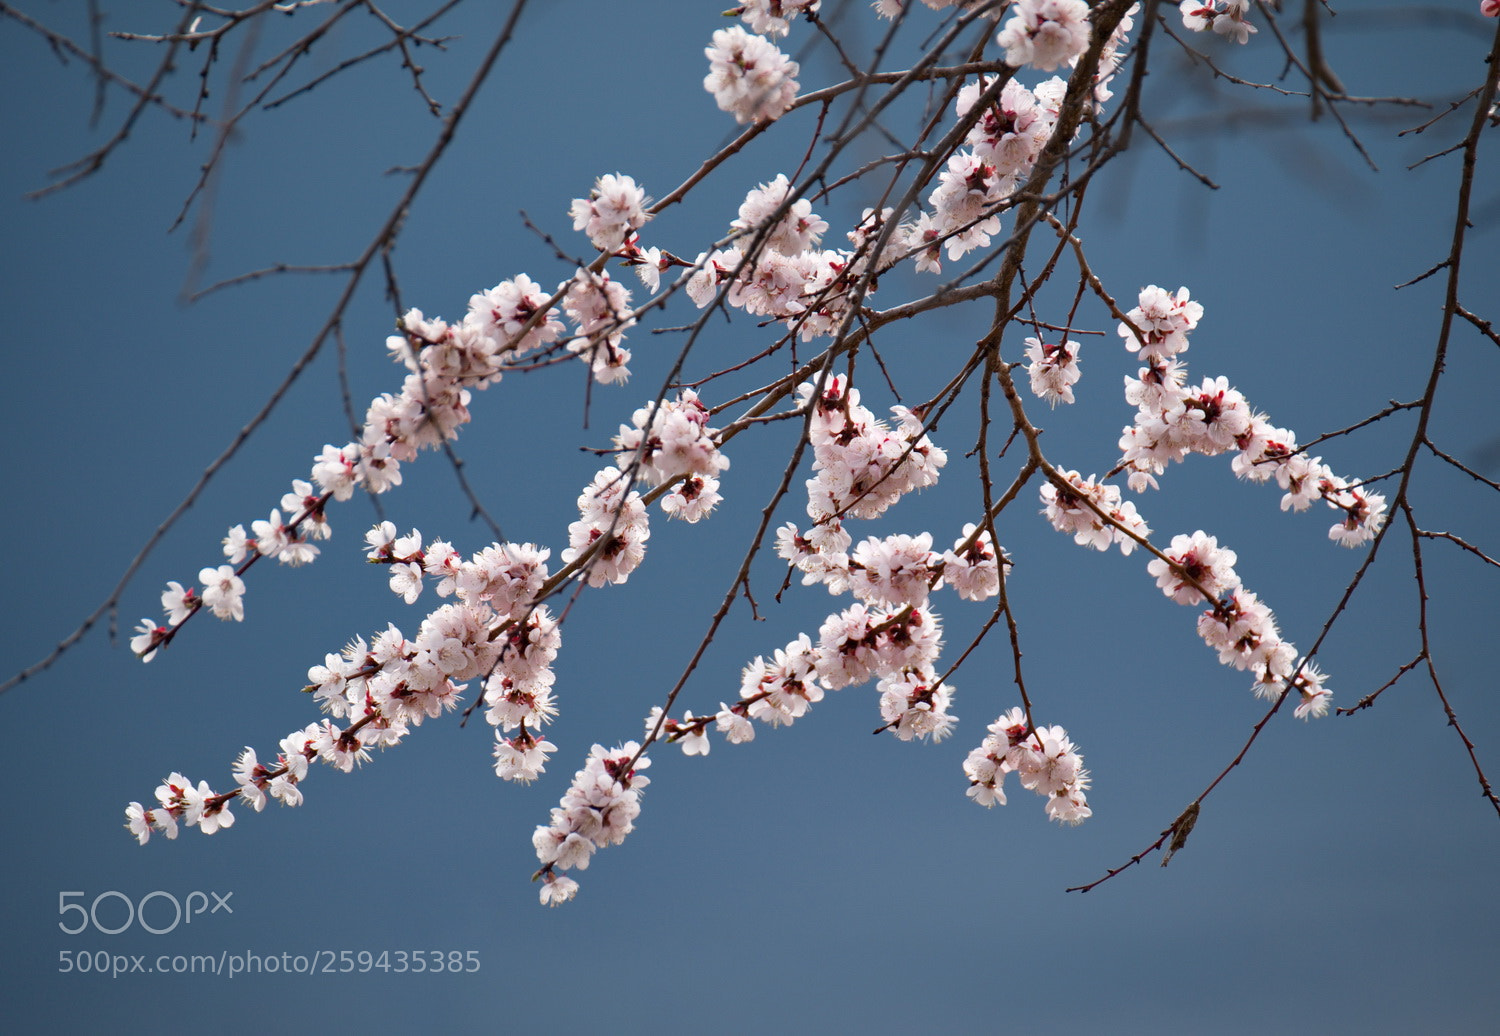 Fujifilm X-T1 sample photo. Russia. flowering apricots on photography